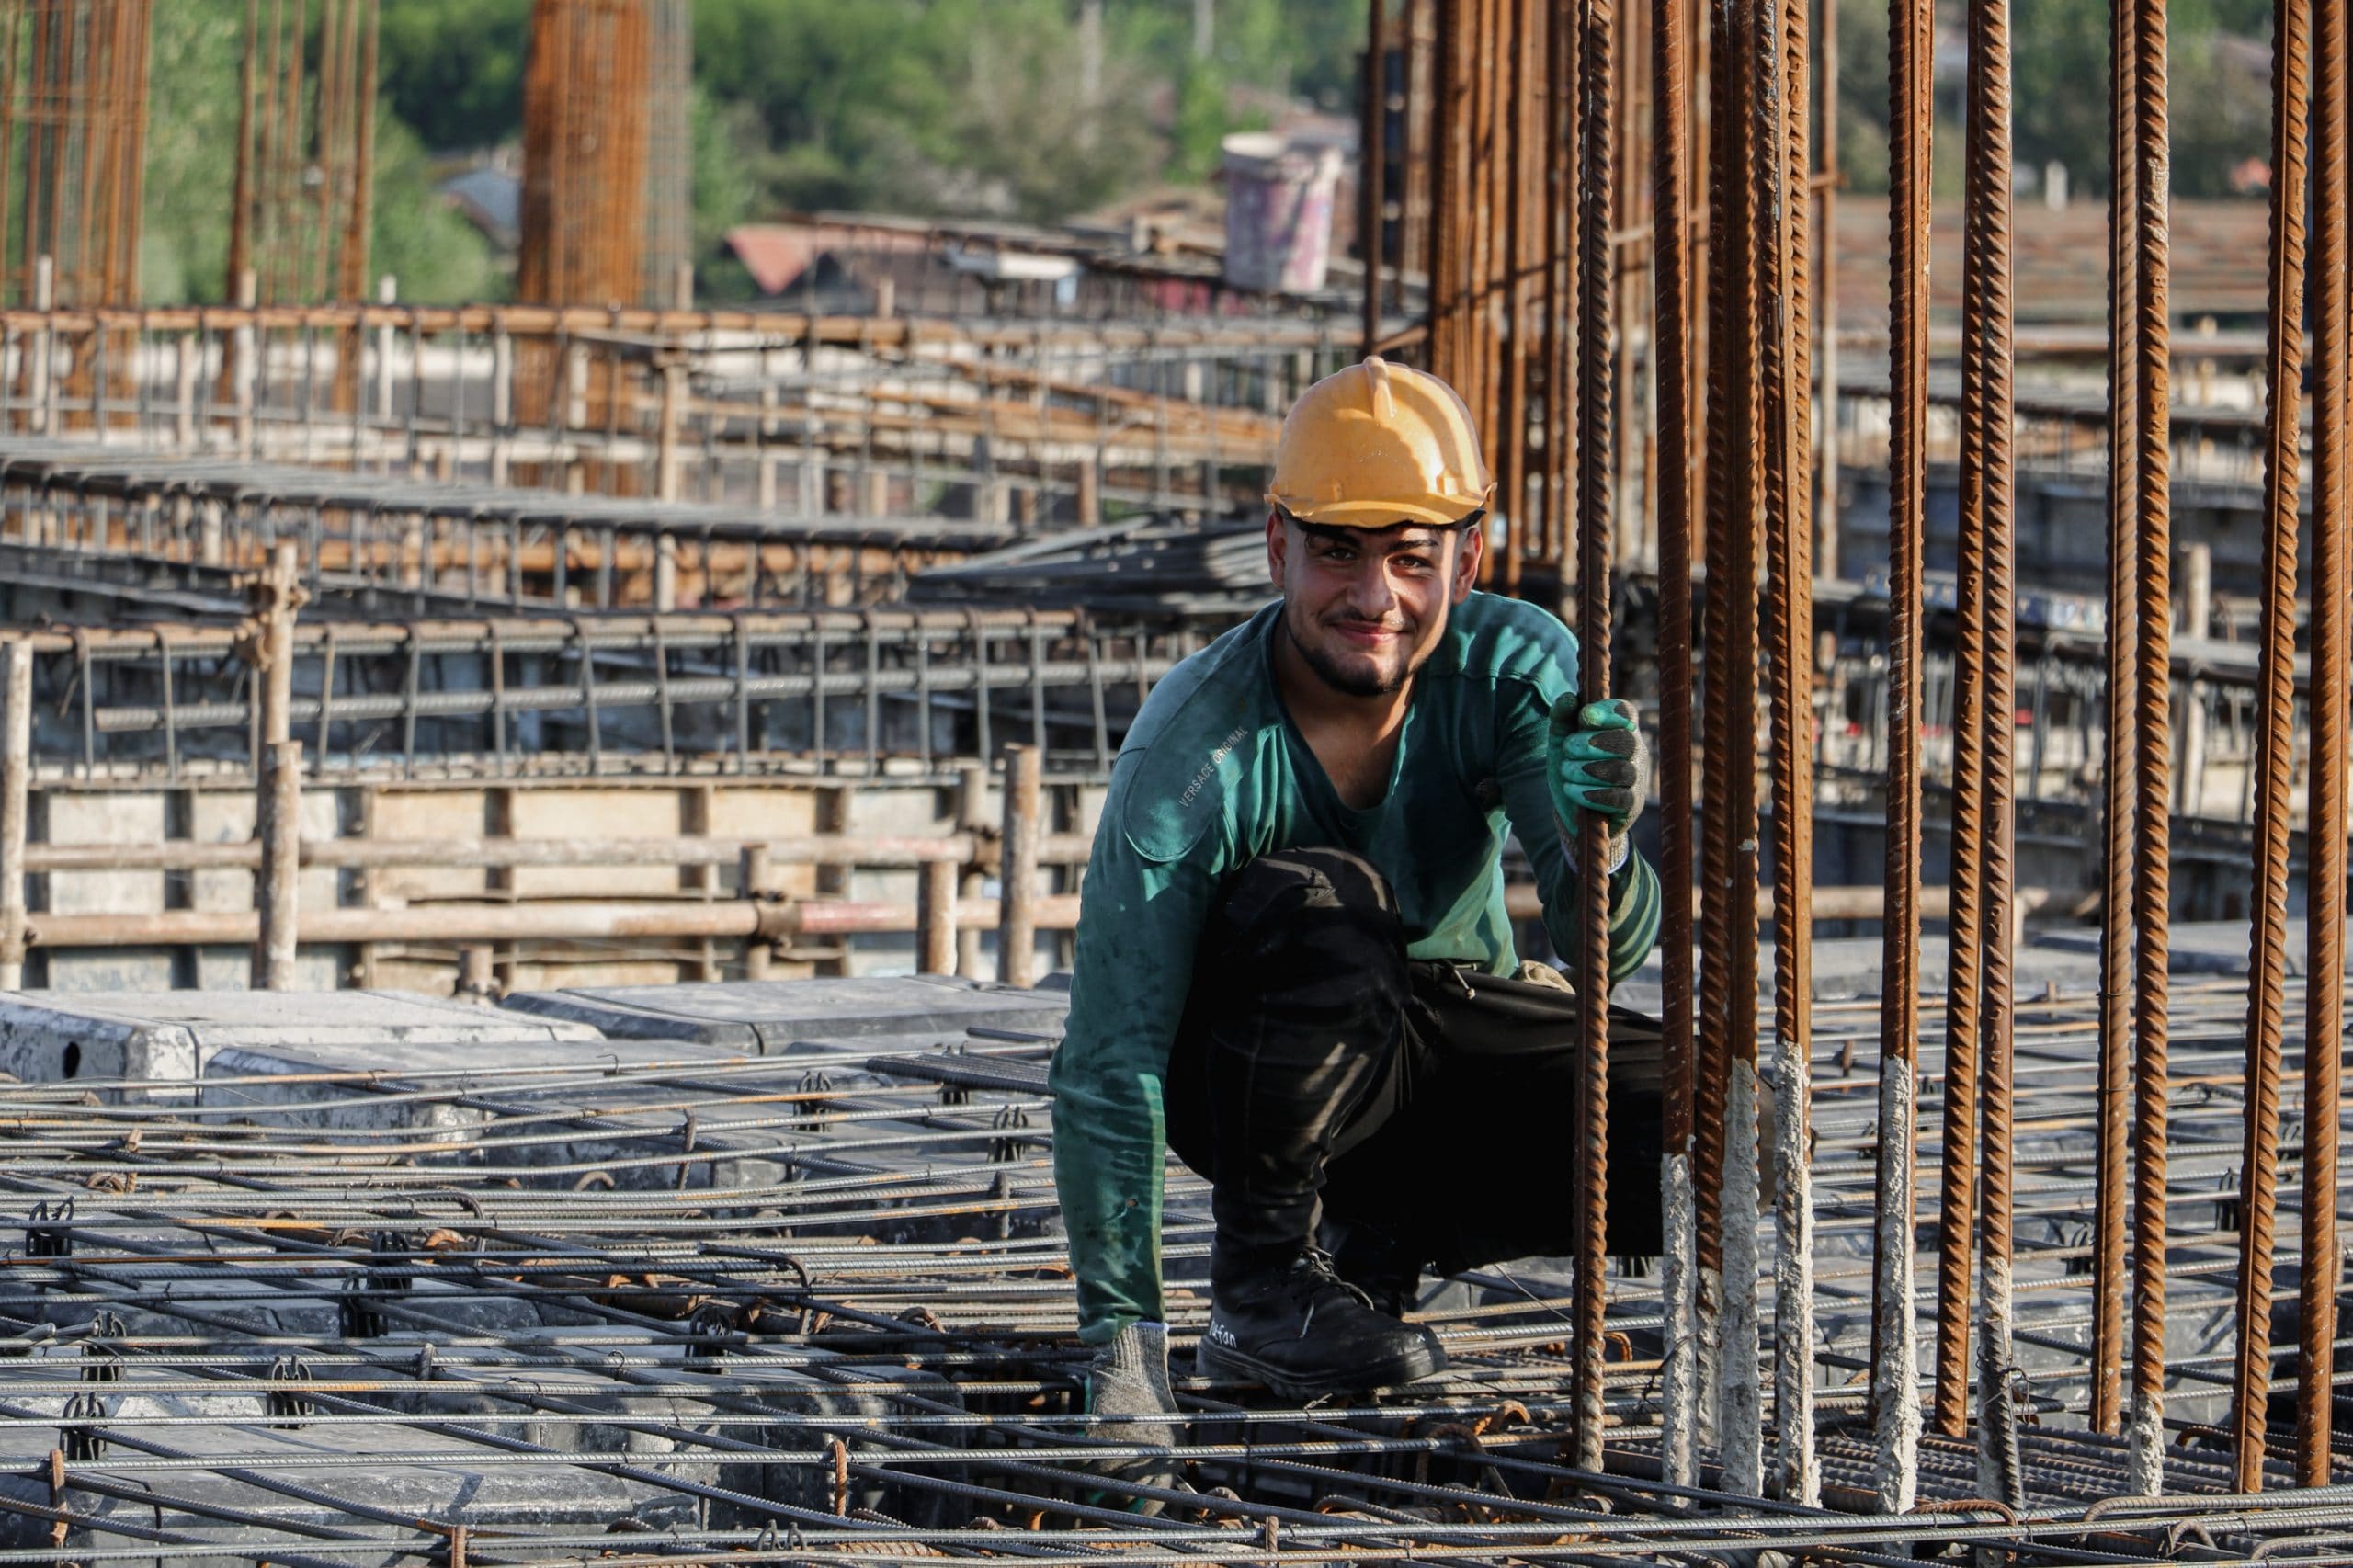 An image of a construction worker at a job site